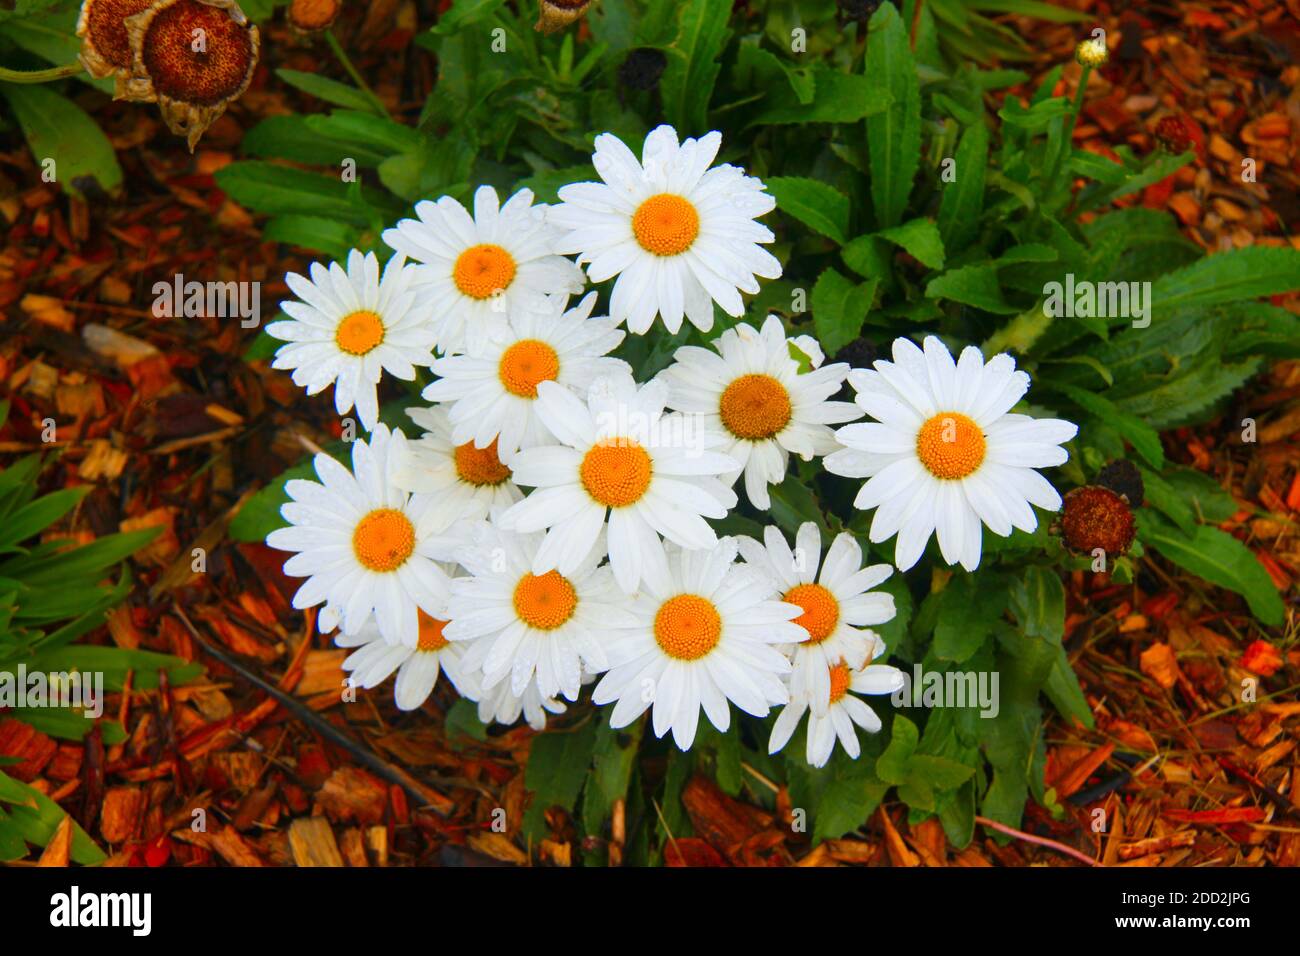 A plant of daisy's with green leaves in a garden with a bark mulch in the fall. Stock Photo